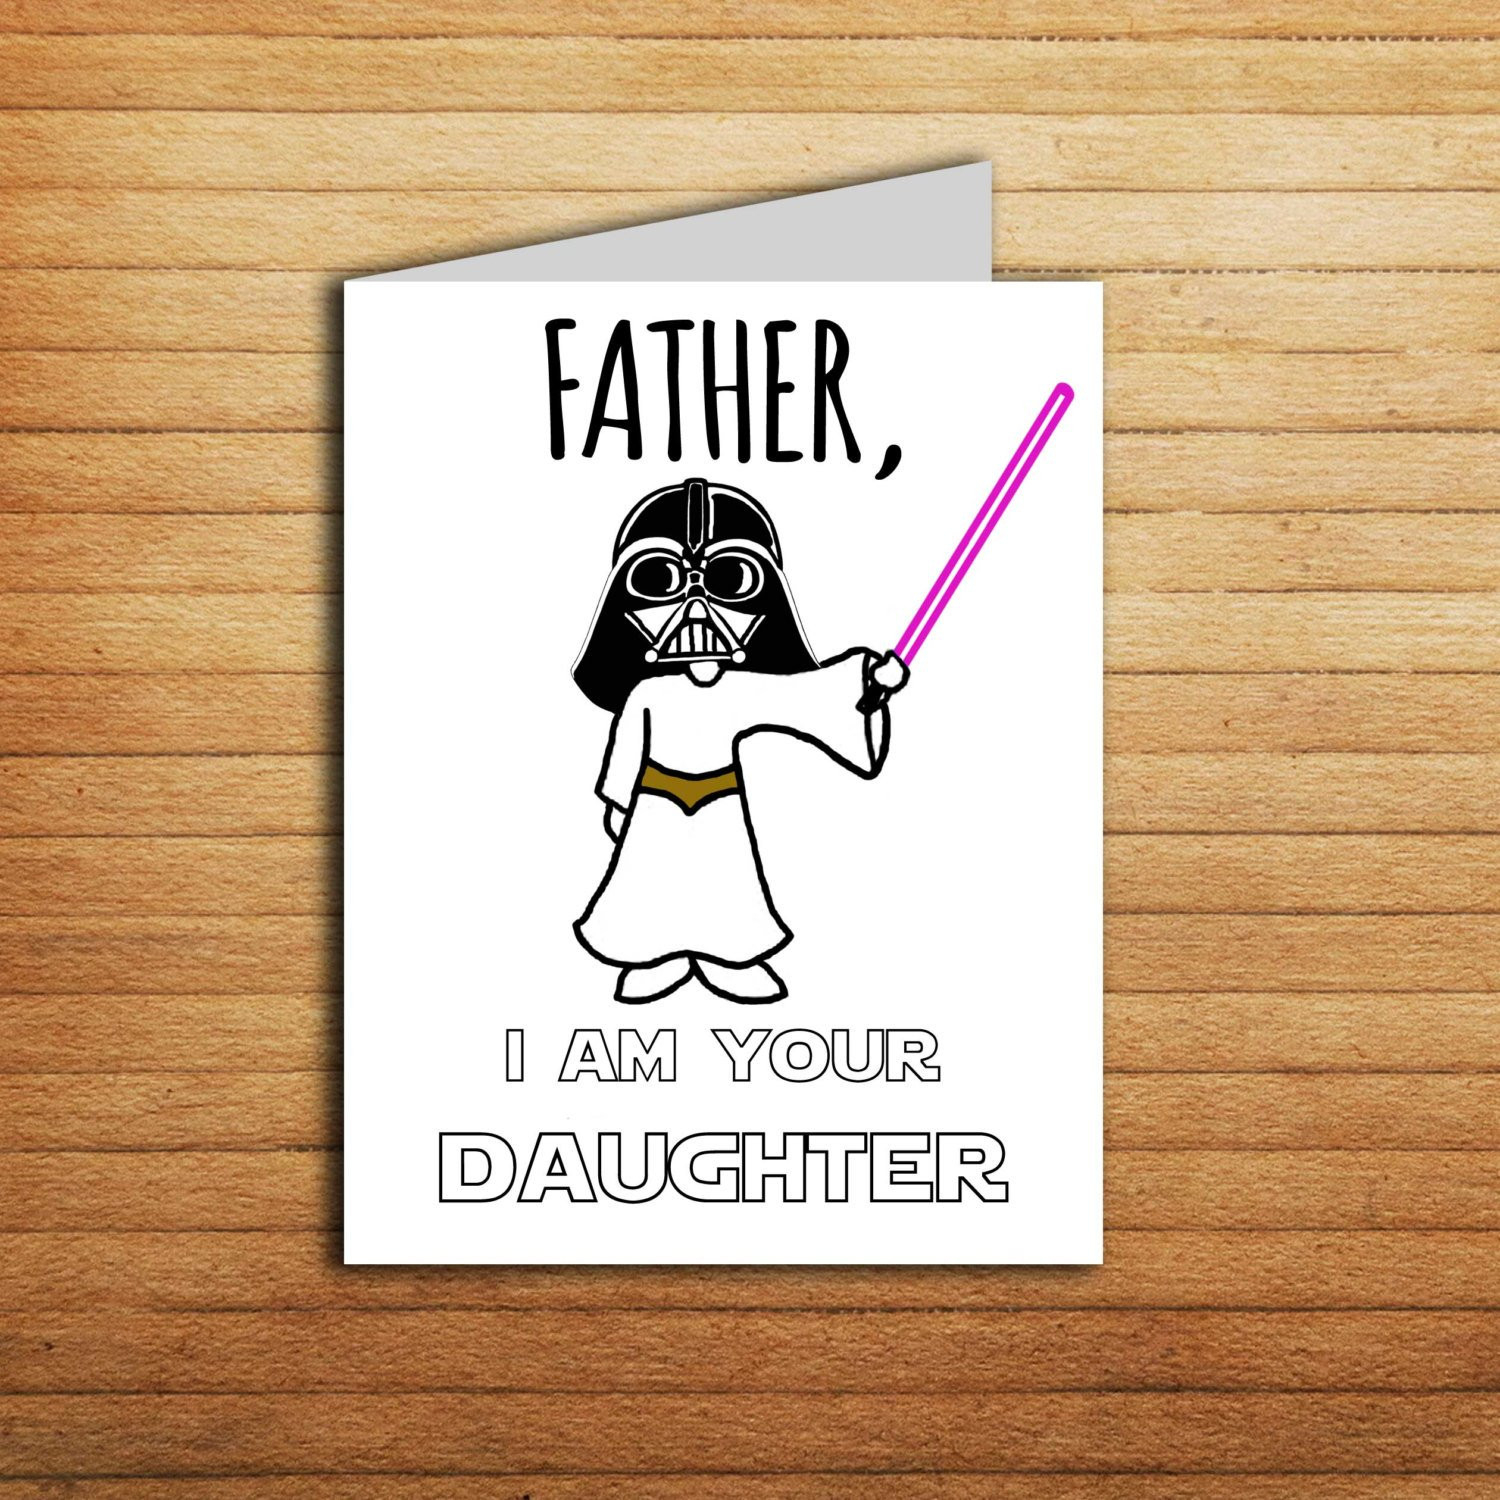 Funny Birthday Card Ideas For Dad The 20 Best Ideas For Funny Birthday Gifts For Dad Home